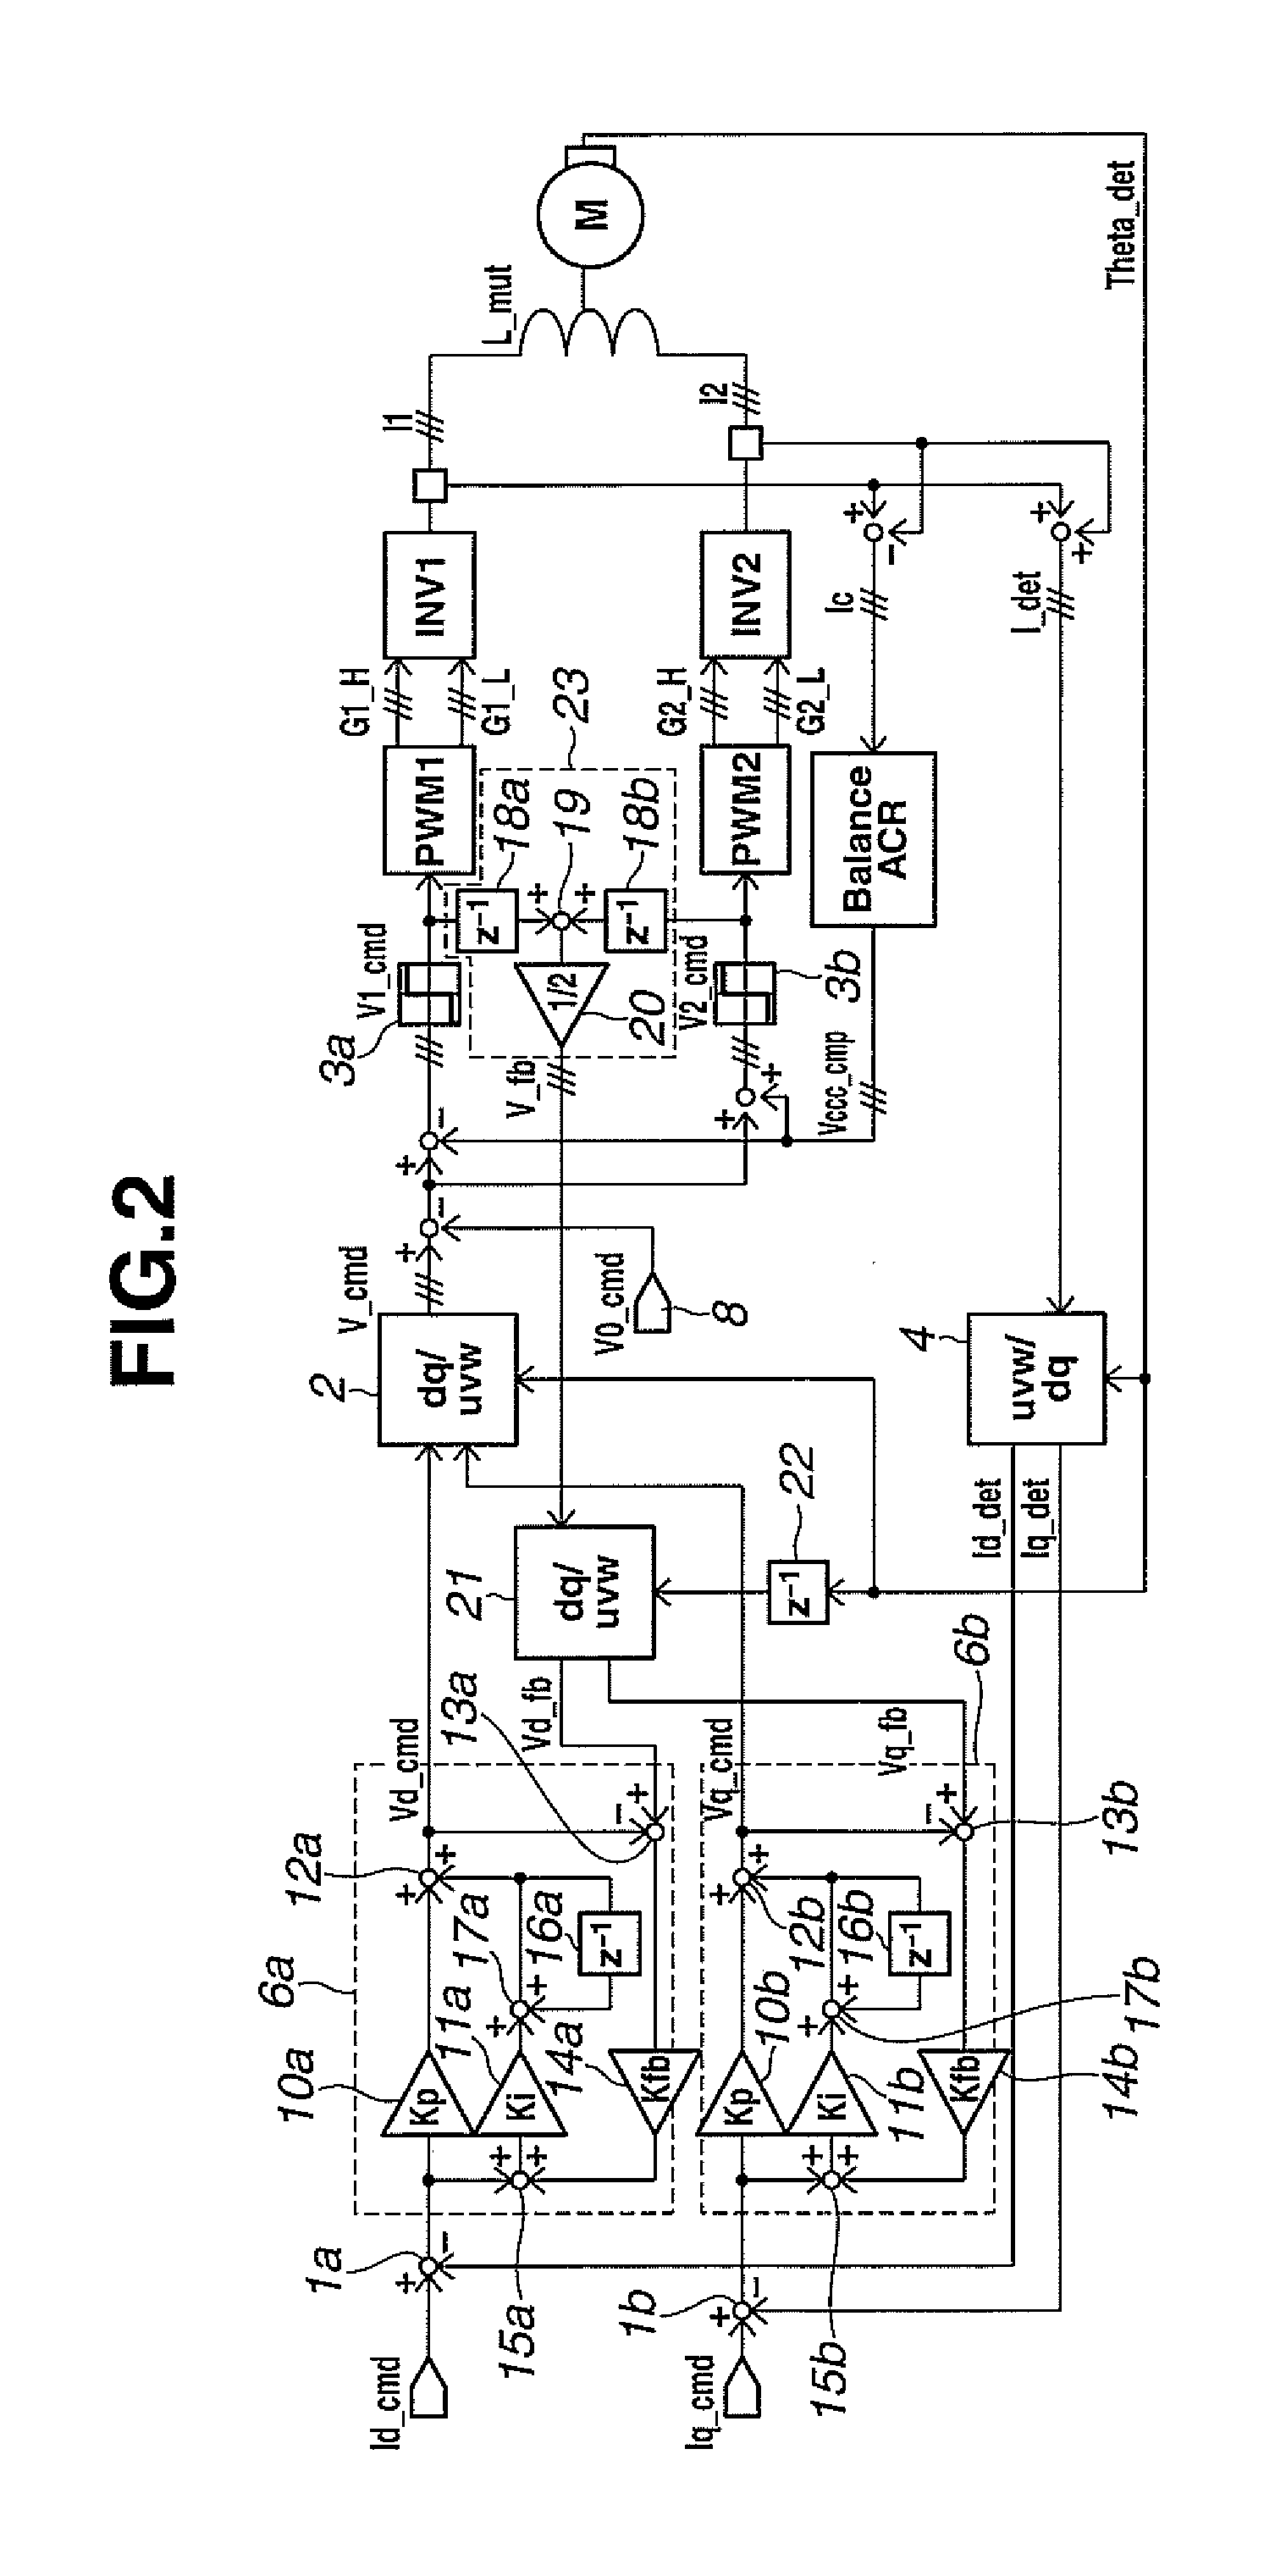 Apparatus for parallel operation of pulse-width modulation power converters